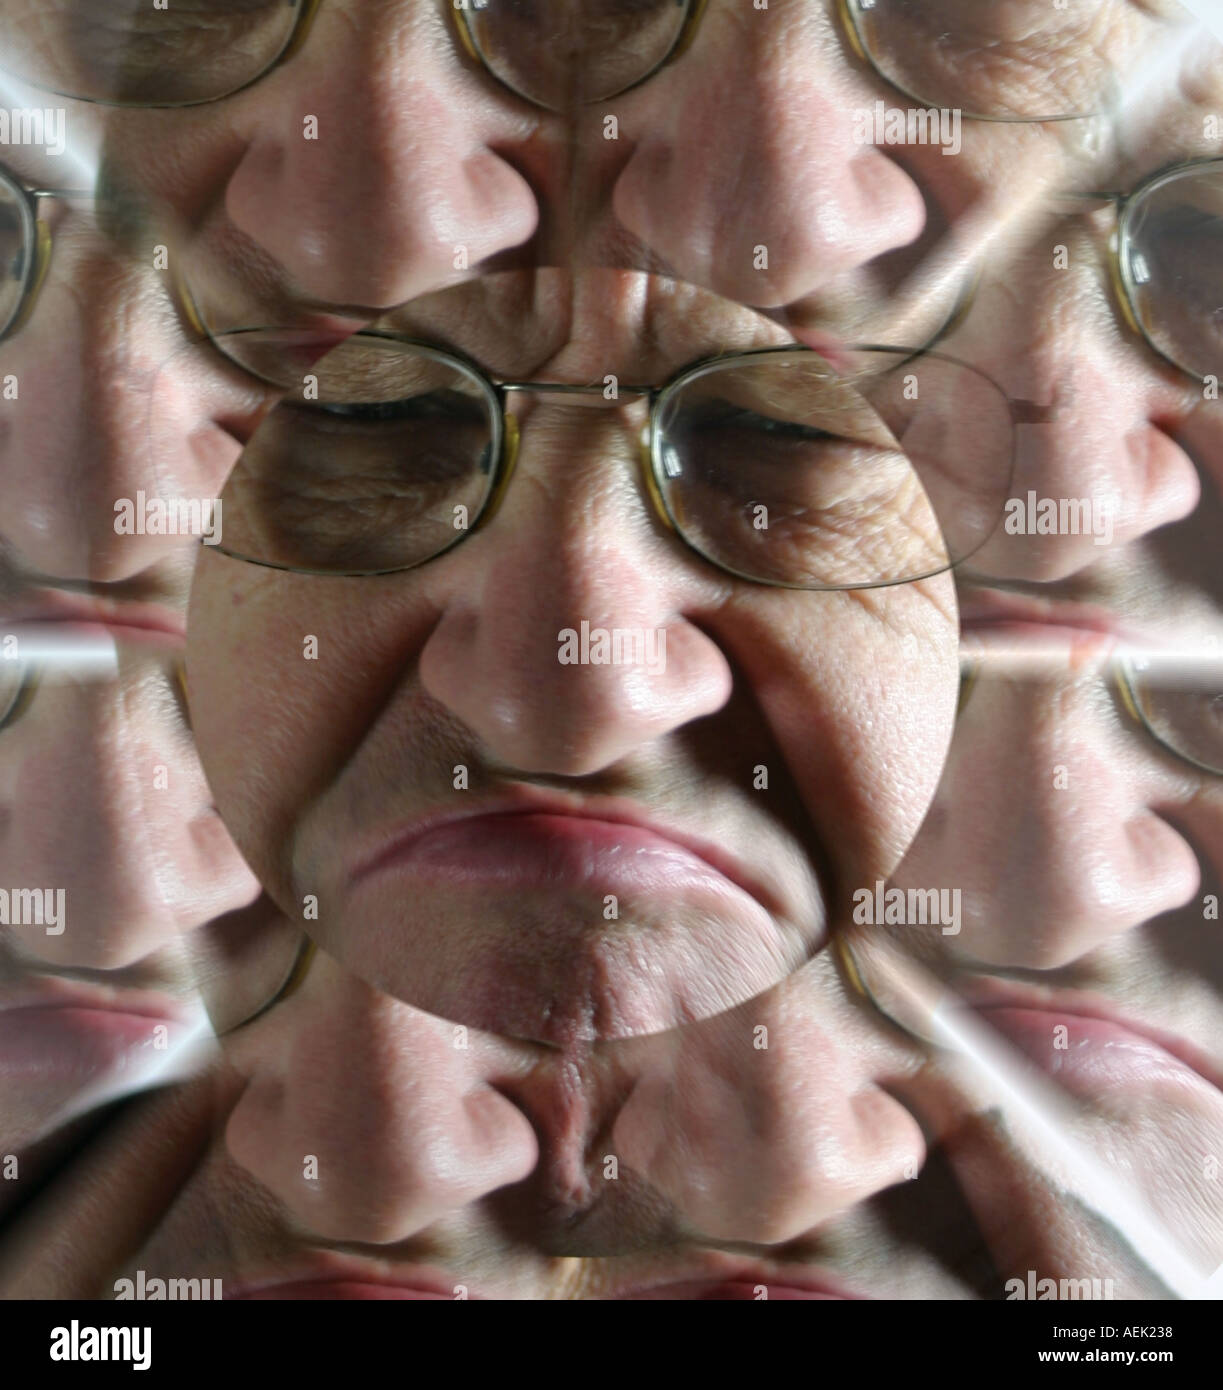 Multiple image of male aged 60 with grumpy face Stock Photo